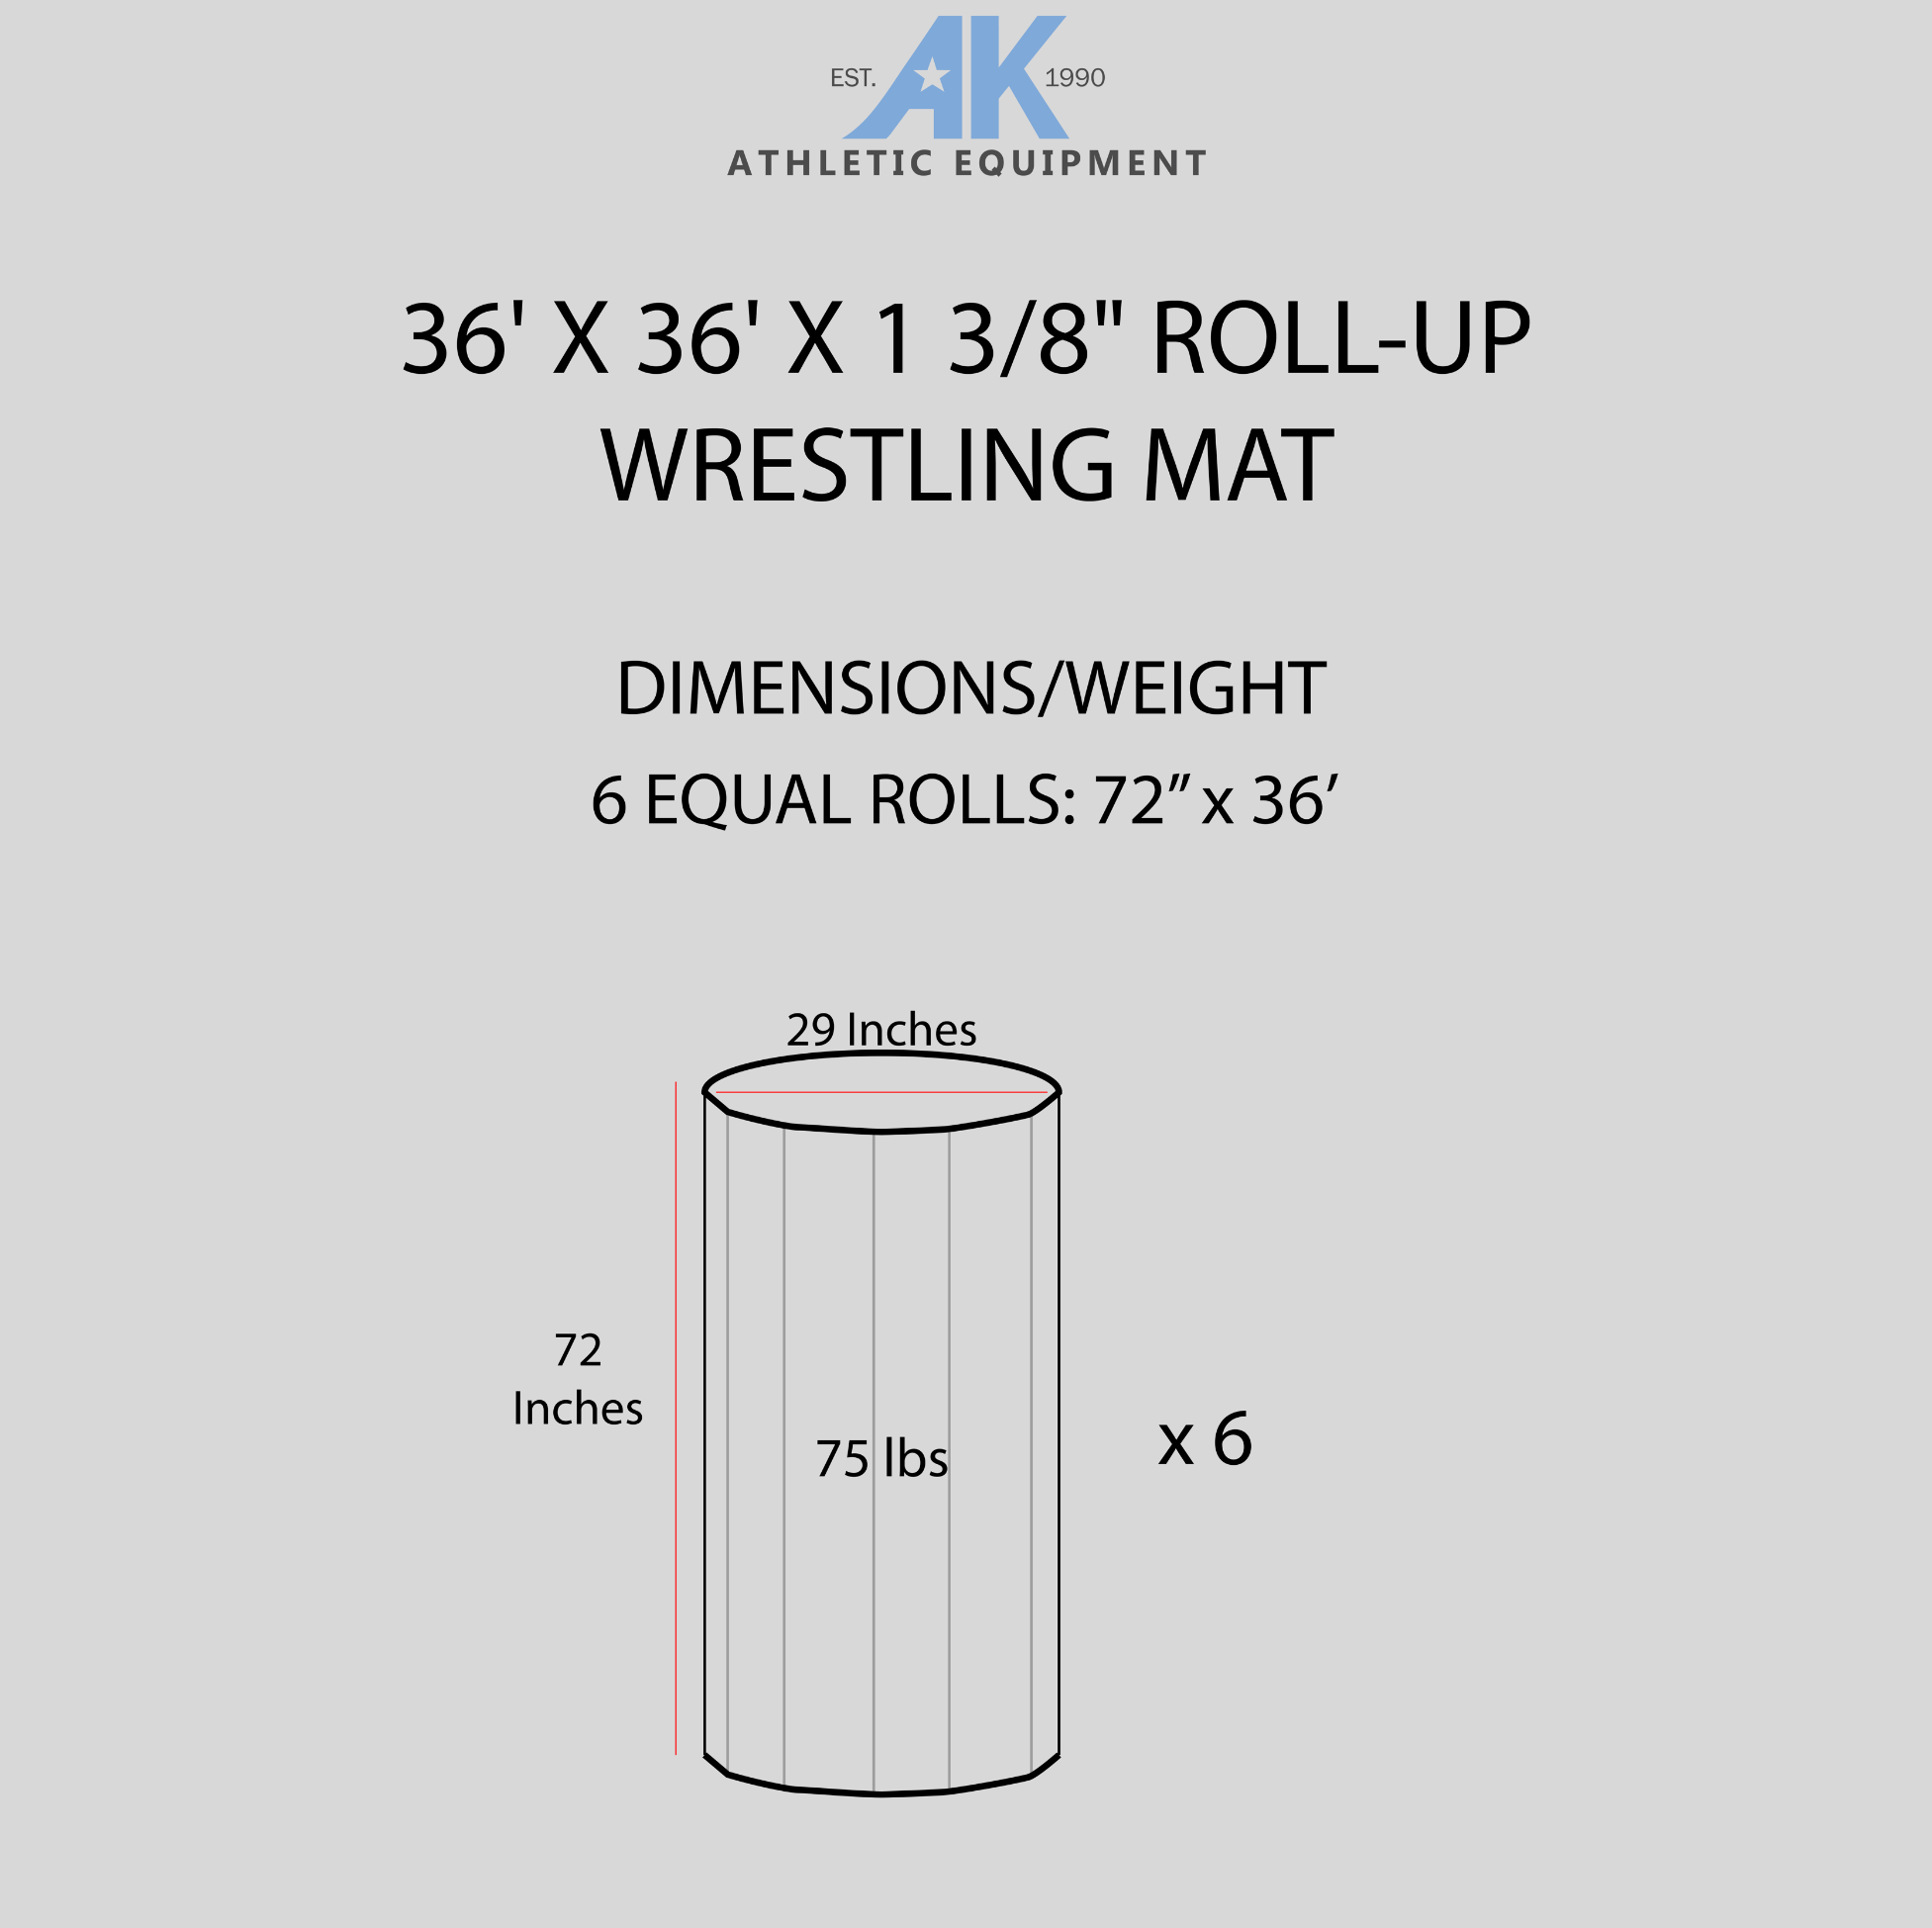 AK Athletics Wrestling Mat Dimensional Spec Sheet. Image provides details for stored dimensions and weight of this wrestling mat product. Wrestling, safety, competition, equipment, mixed martial arts, mats, MMA, regulation.